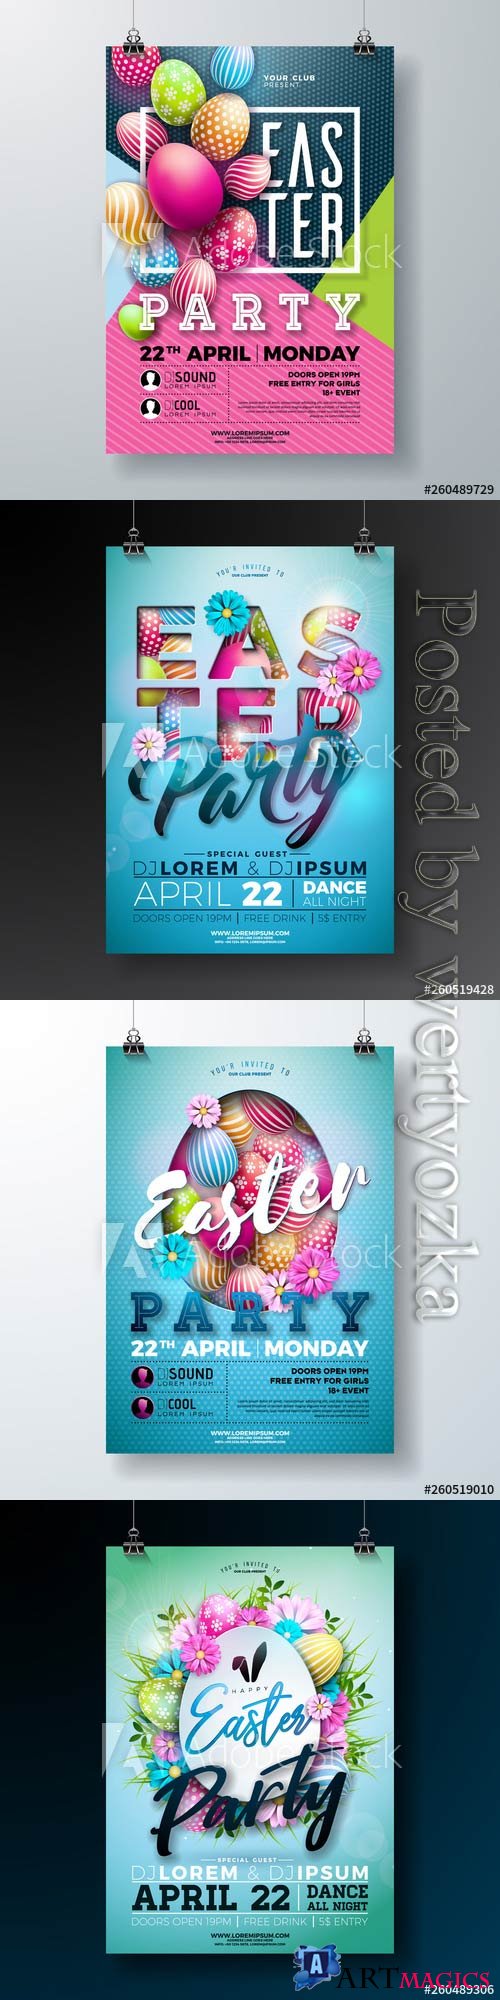 Vector Easter party flyer vector illustration